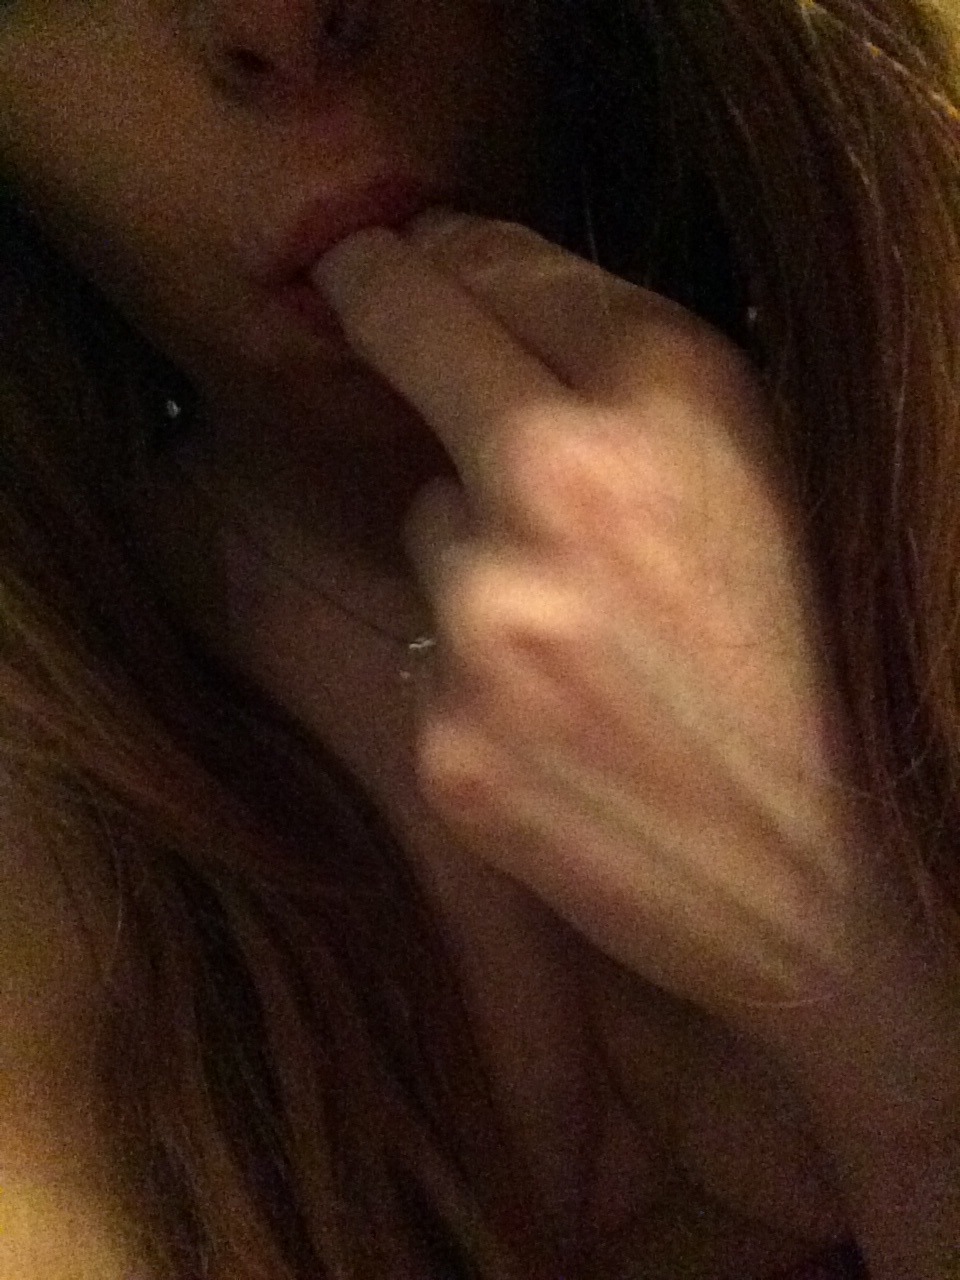 imjustawethornygirl:  Mm someone come replace my fingers with their throbbing hard